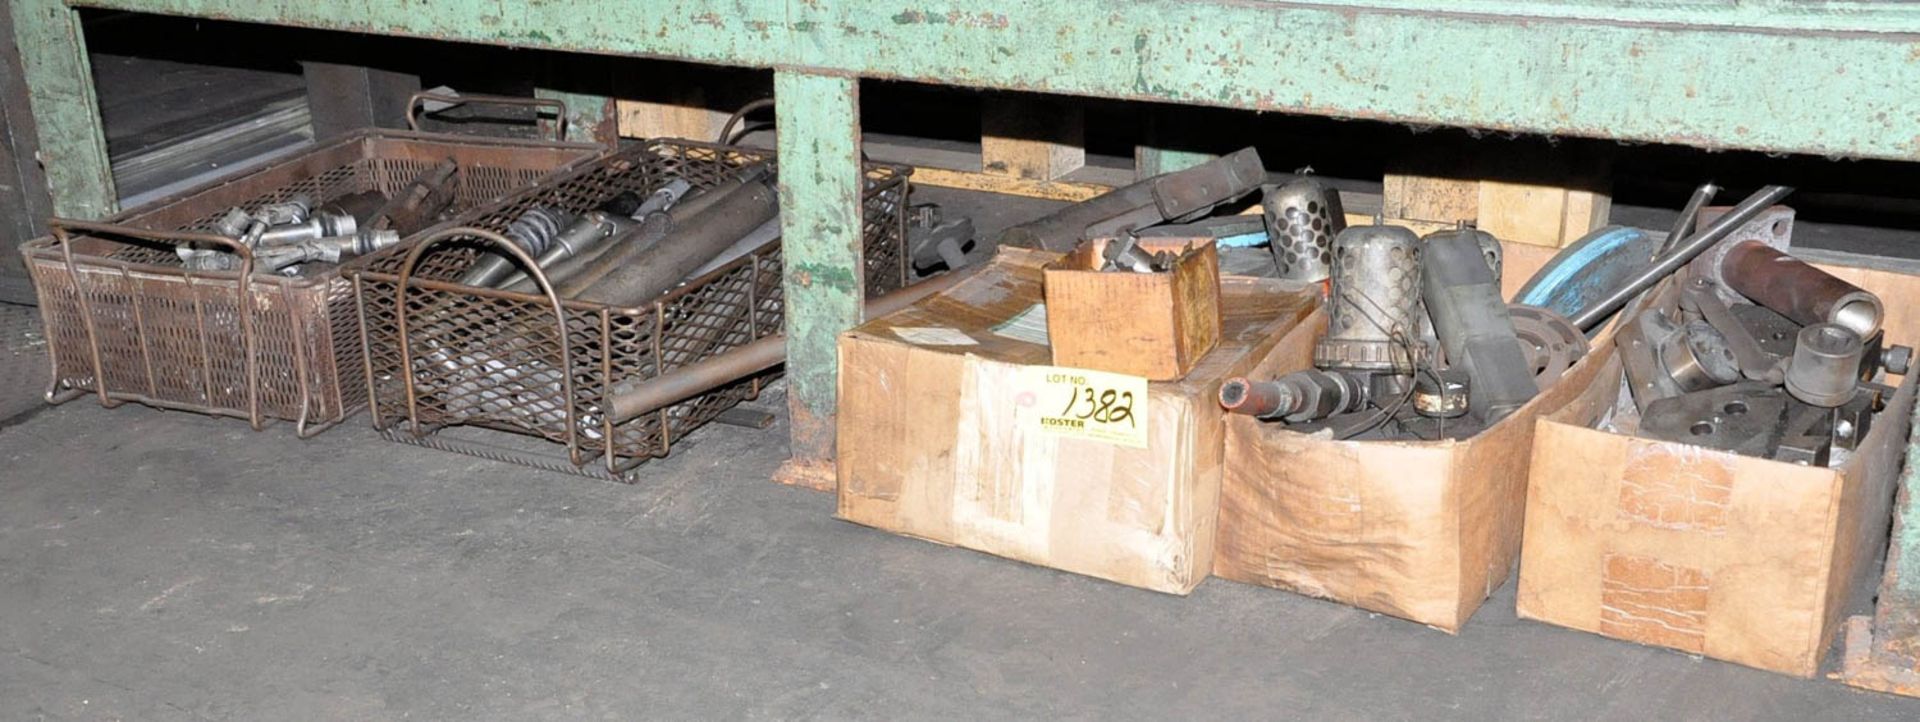 VARIOUS TOOLING IN (2) BASKETS & (3) BOXES UNDER (1) BENCH, (TOOL ROOM-TIFFIN)